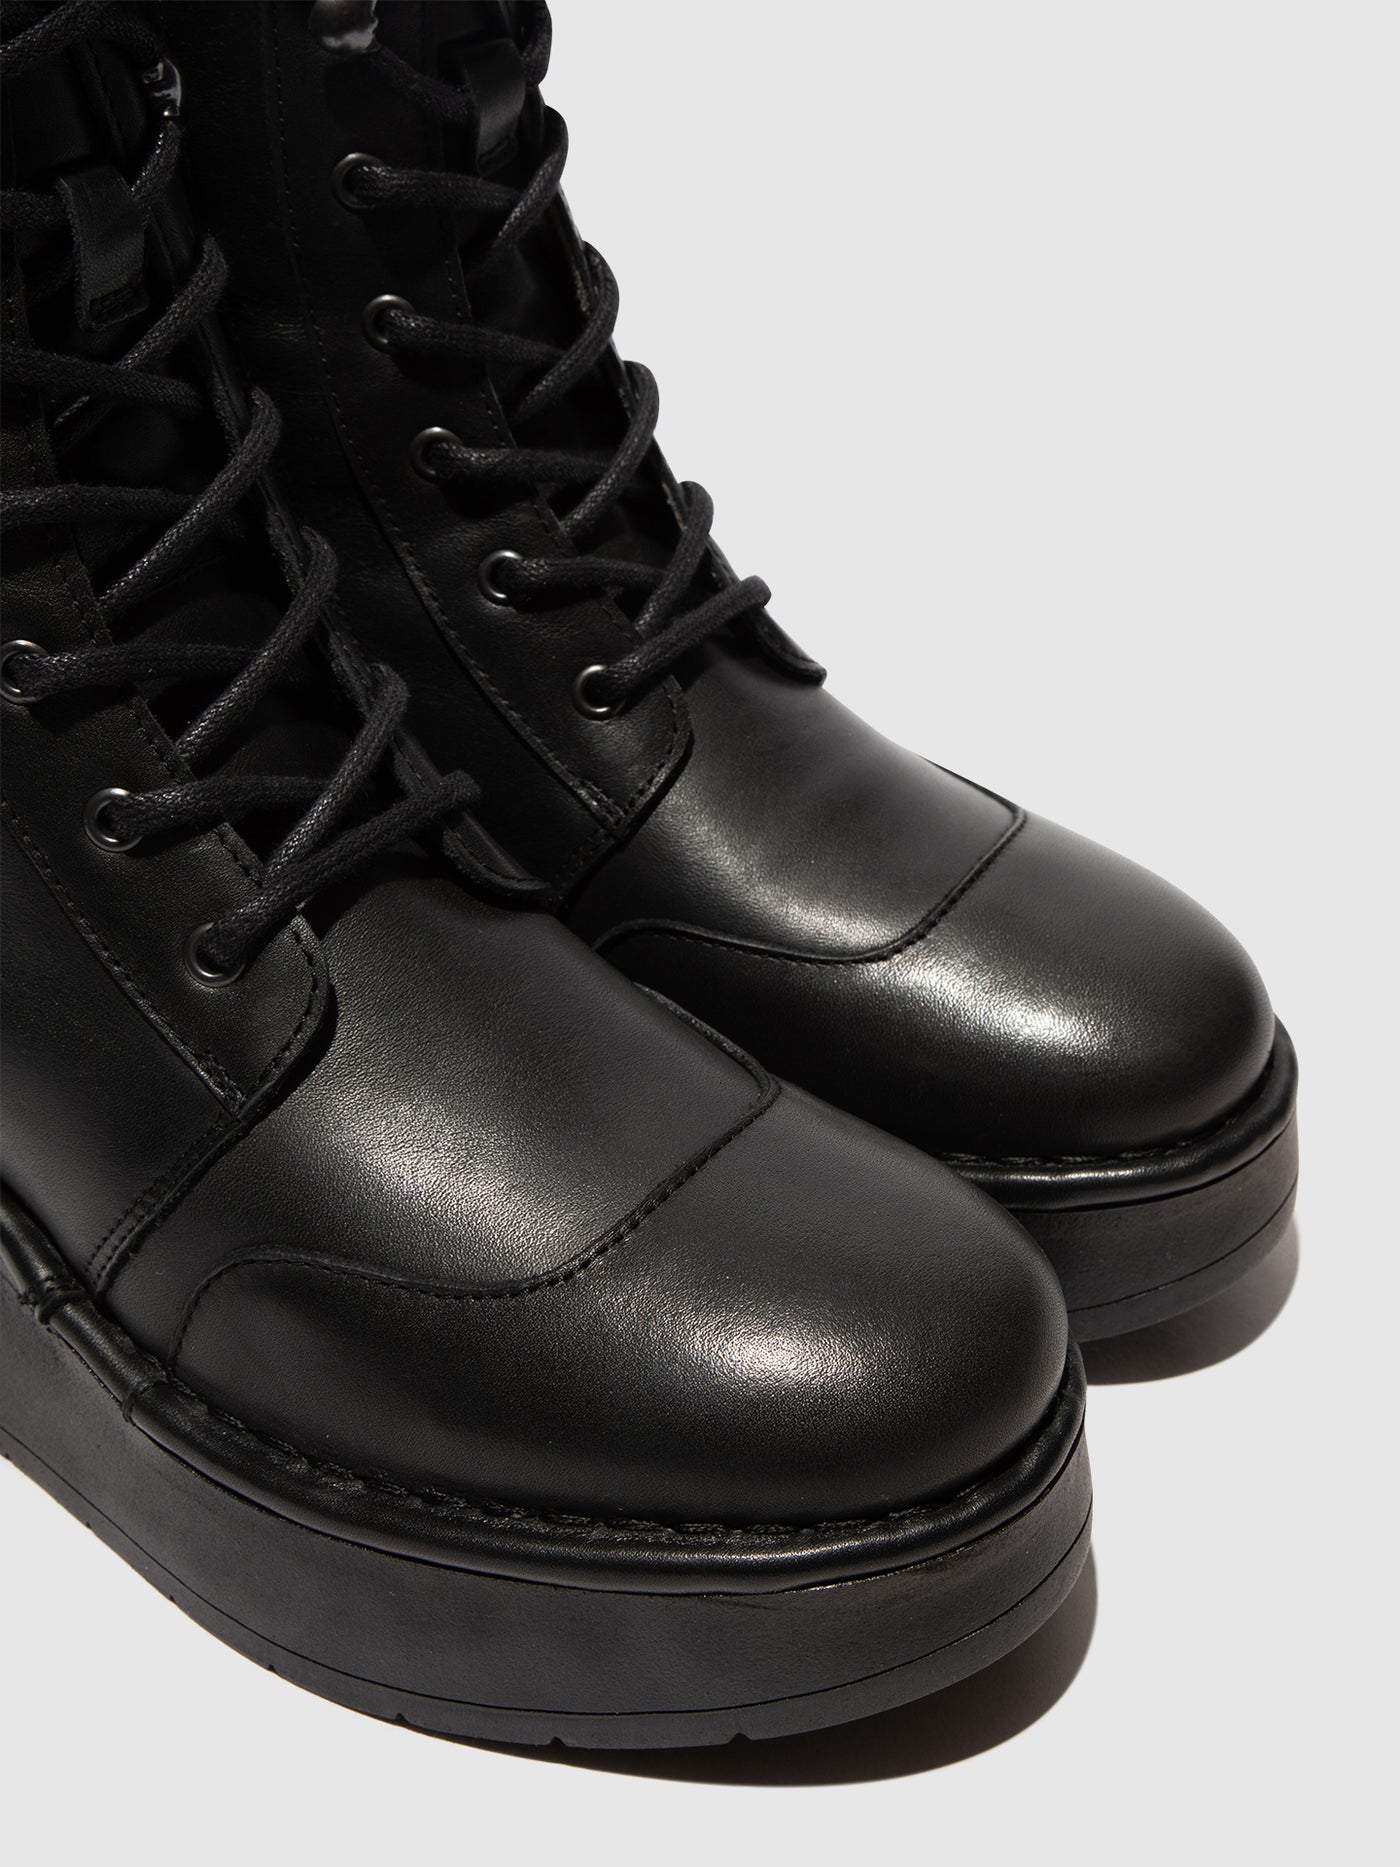 Lace-up Boots HITT258FLY BLACK